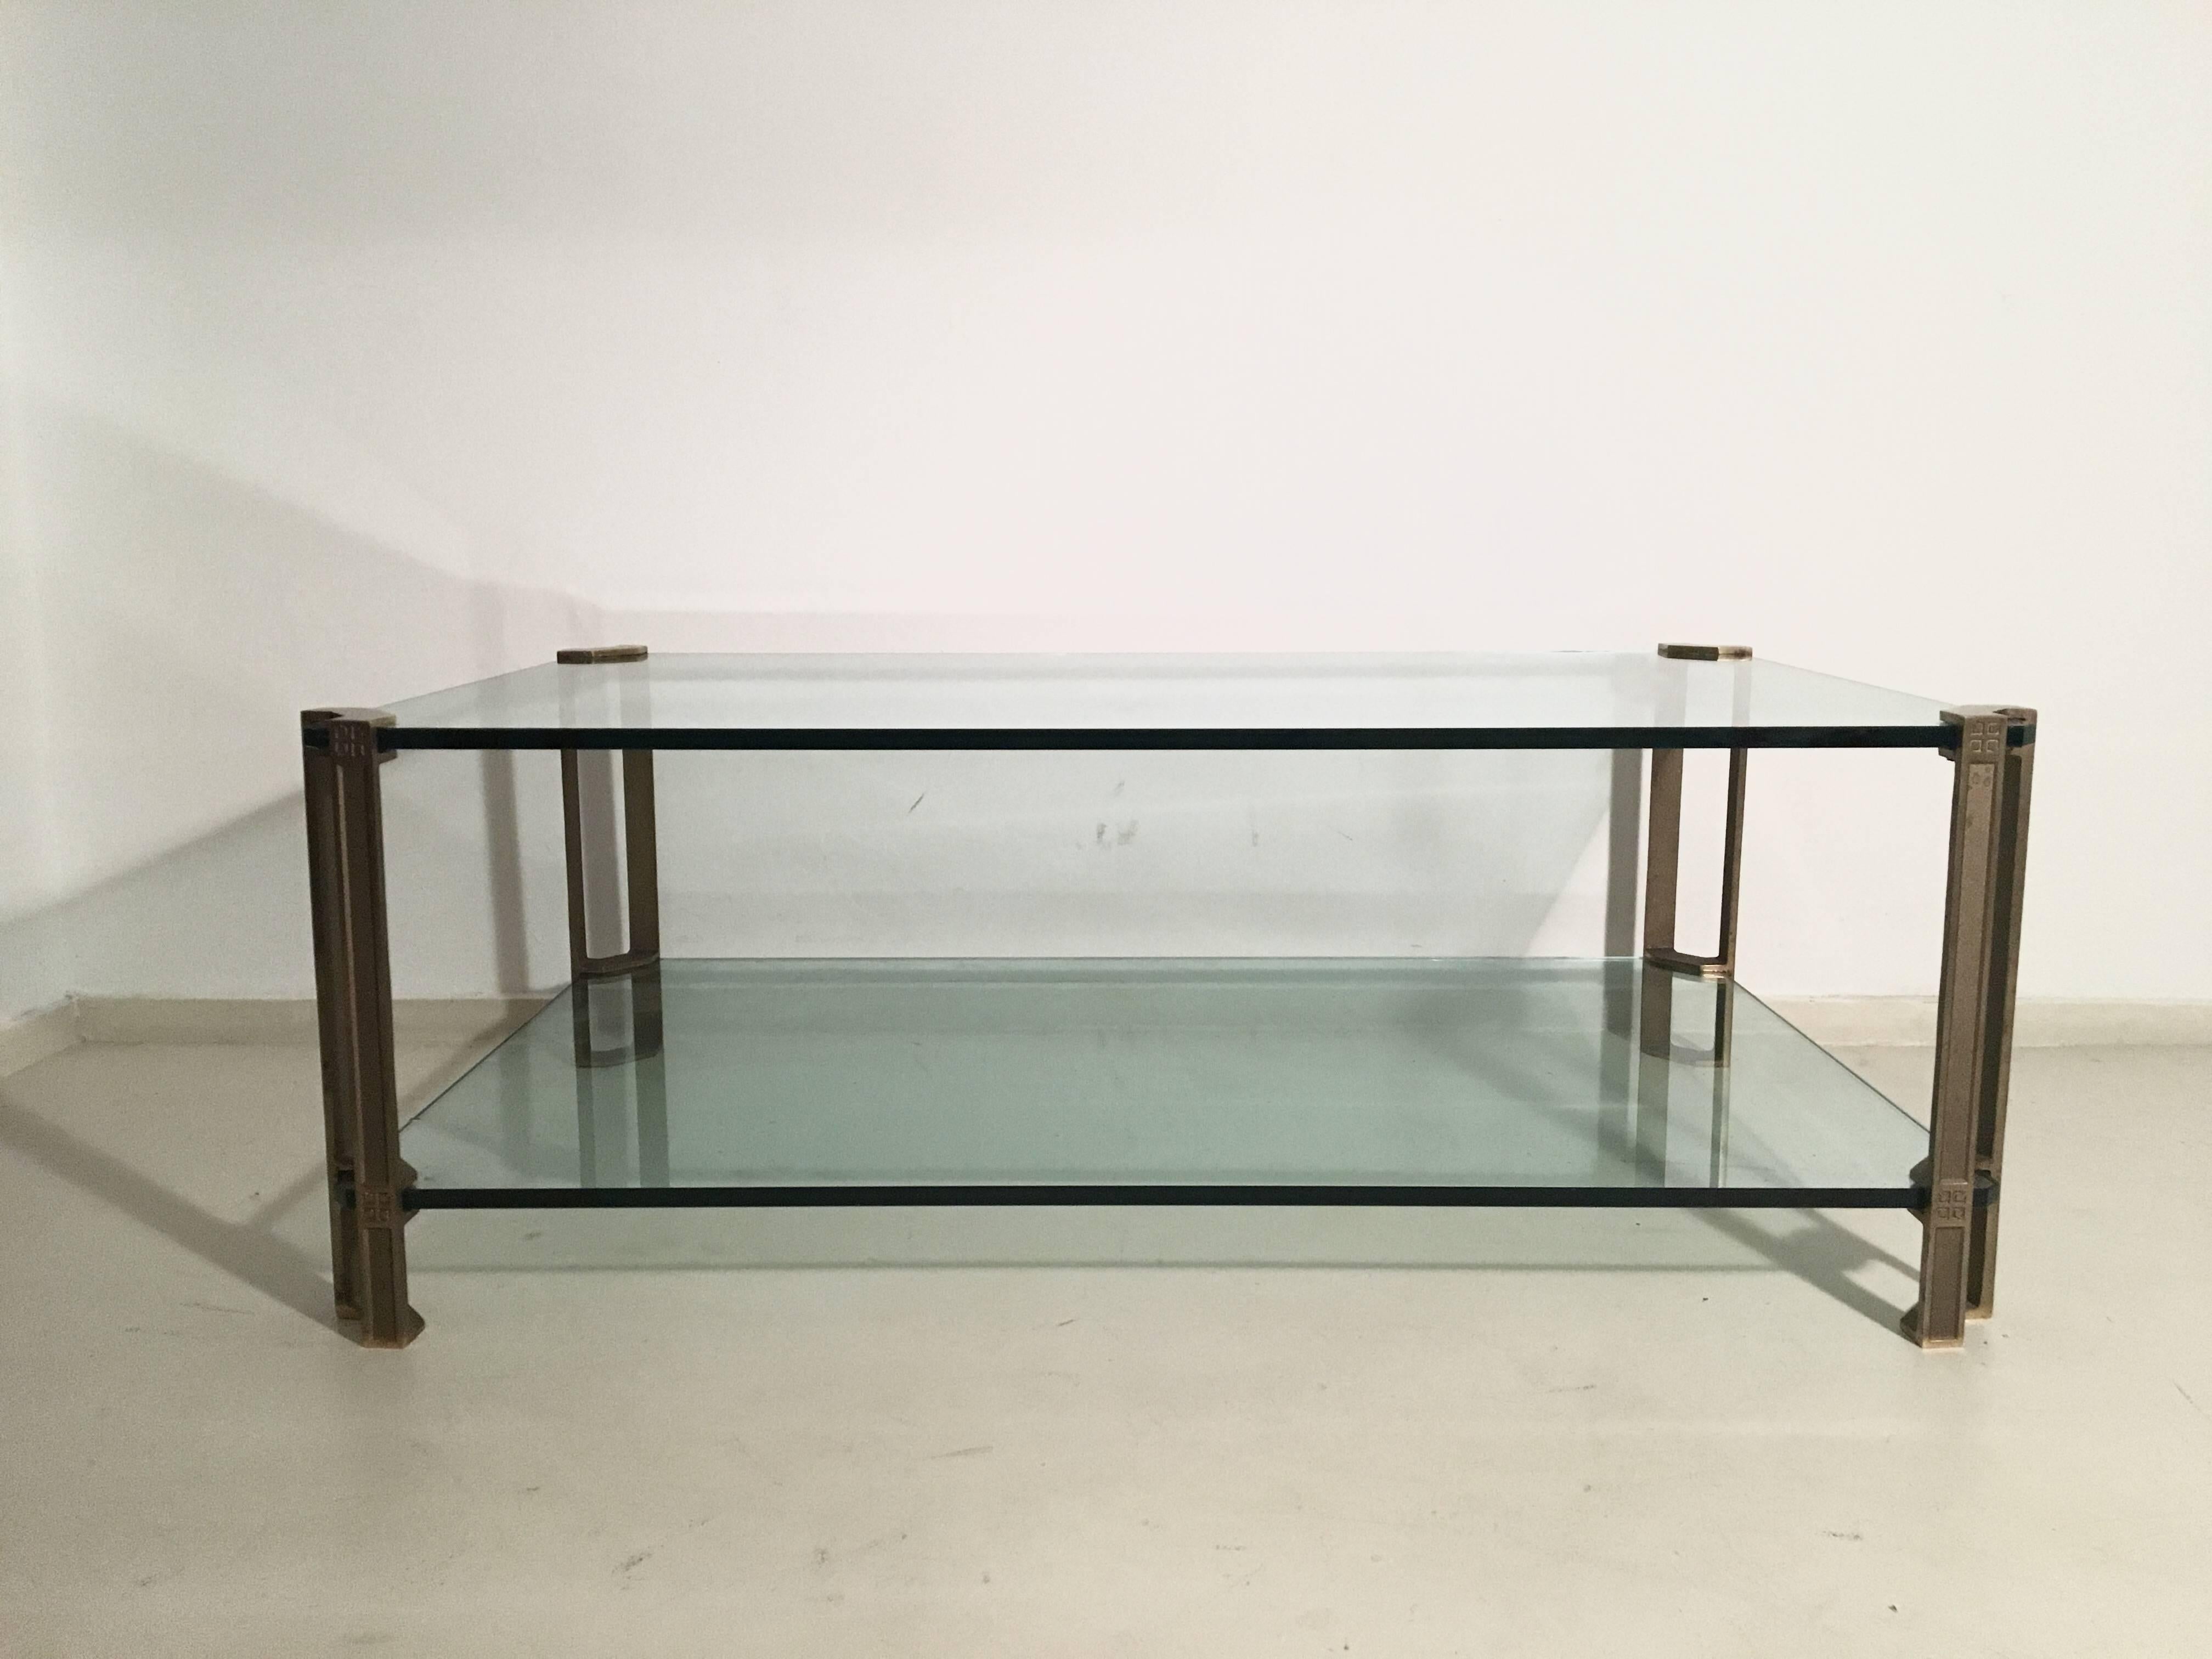 This T24D coffee table was designed by Peter Ghyczy and was manufactured in 1979 in the Netherlands. This table comes with two thick glass tops and features brass legs. Other then the minor chip in the glass, the table remains in excellent condition.